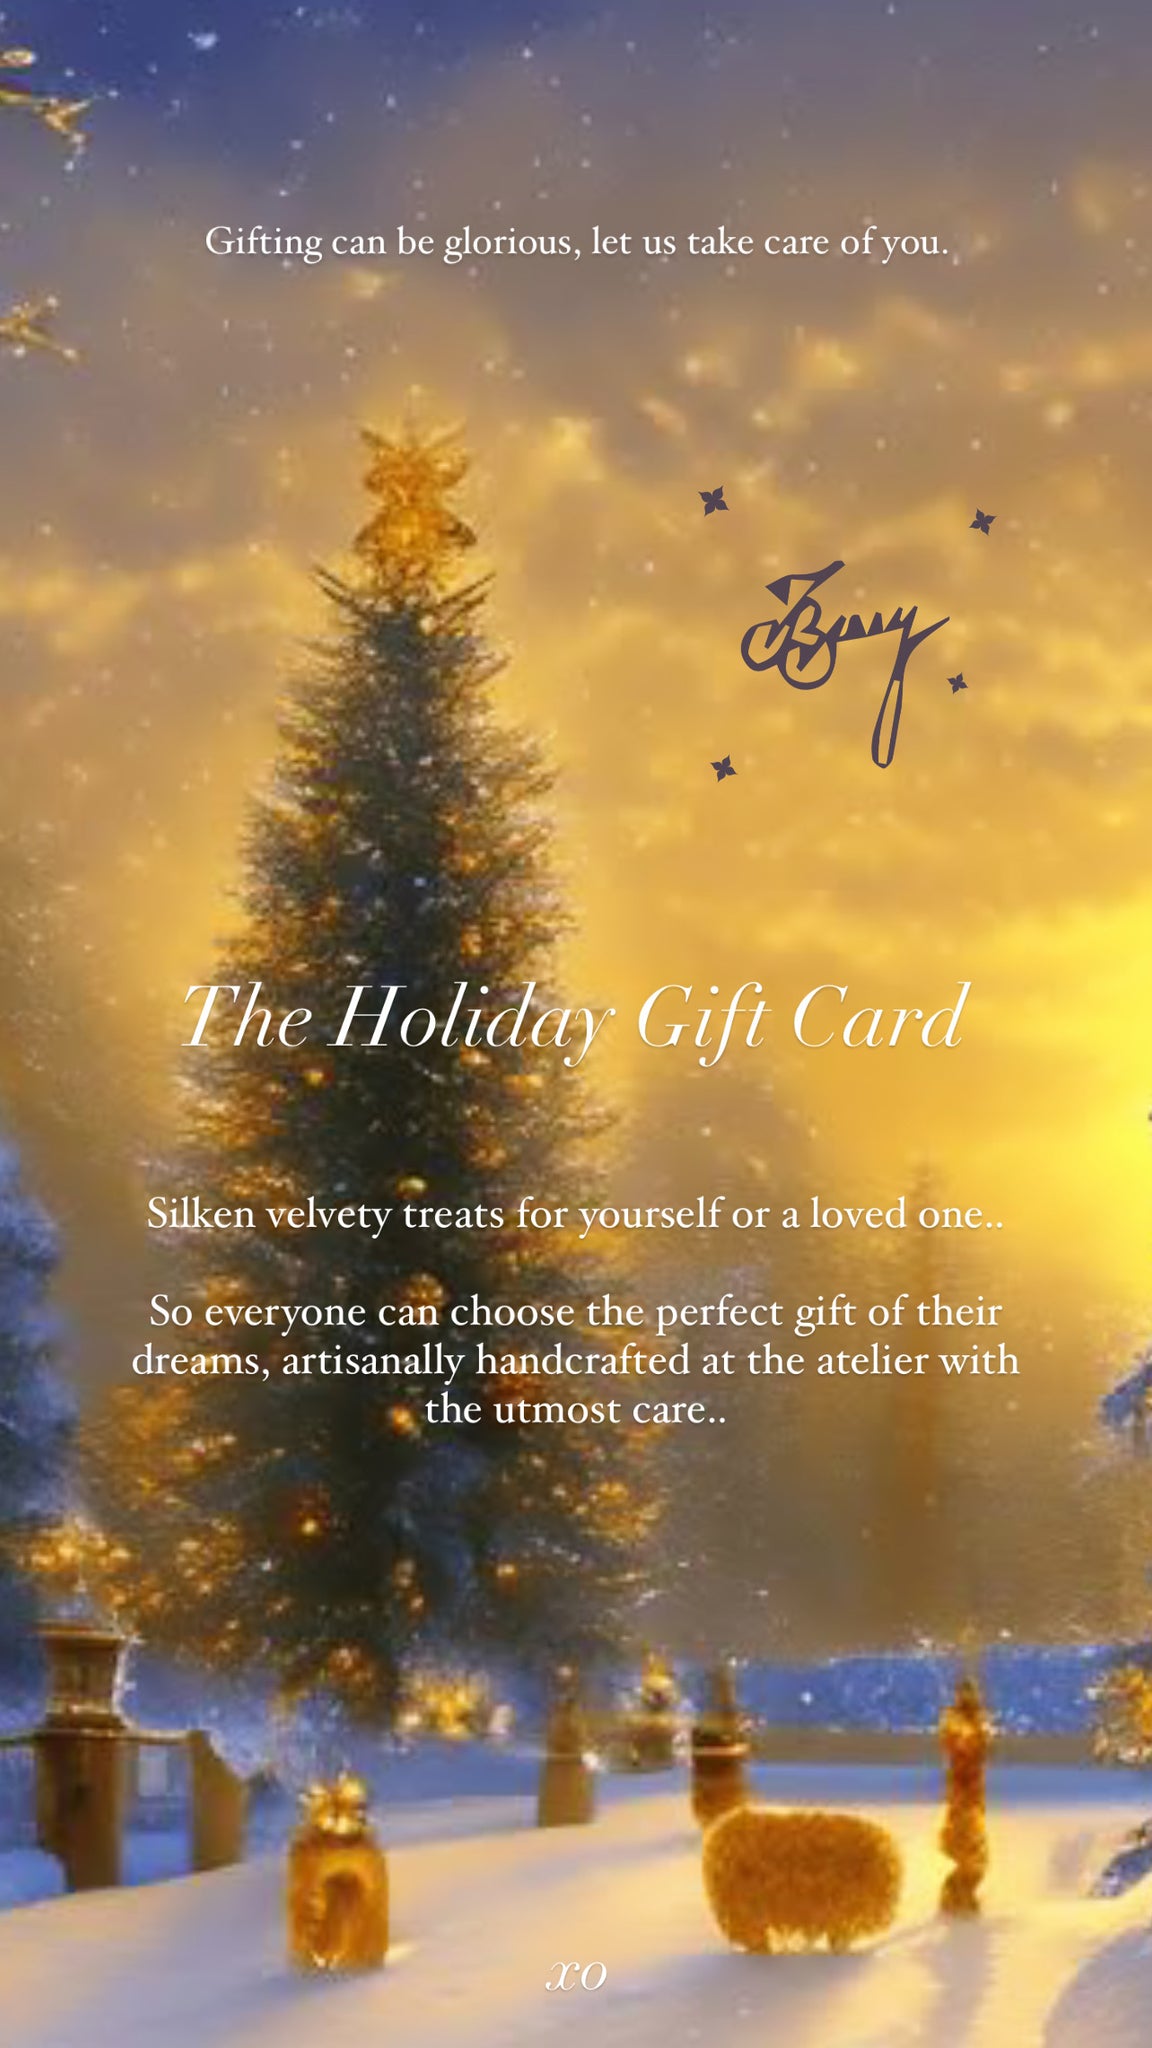 The Holiday Gift Card